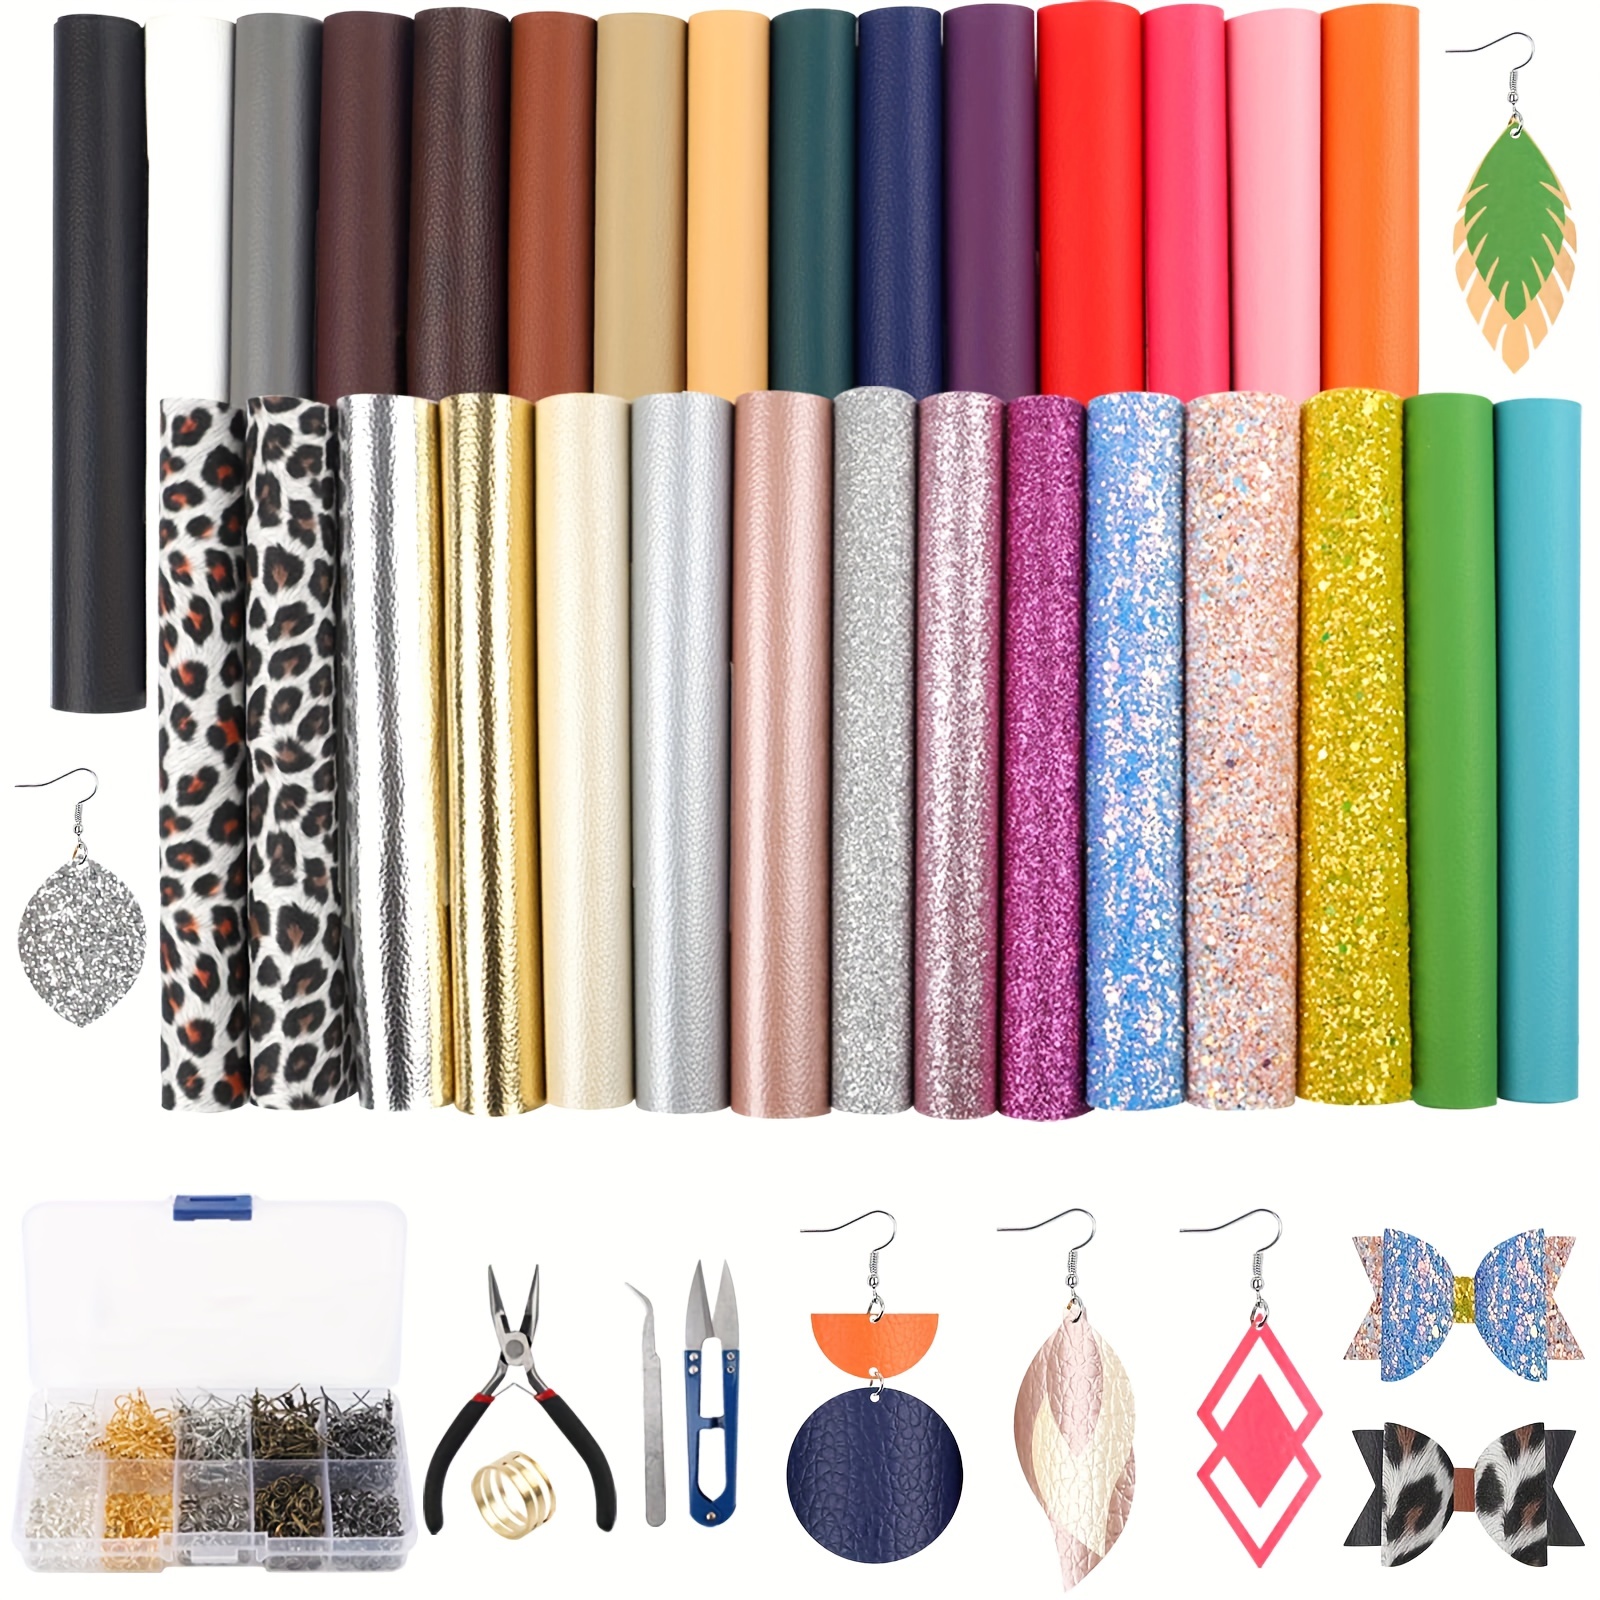 1 Roll Leather Fabric Leather Scraps Leather Sewing Leather Craft Kits  Leather Tool Leather Earring Making Kit Leather for Jewelry Making Leather  Hide